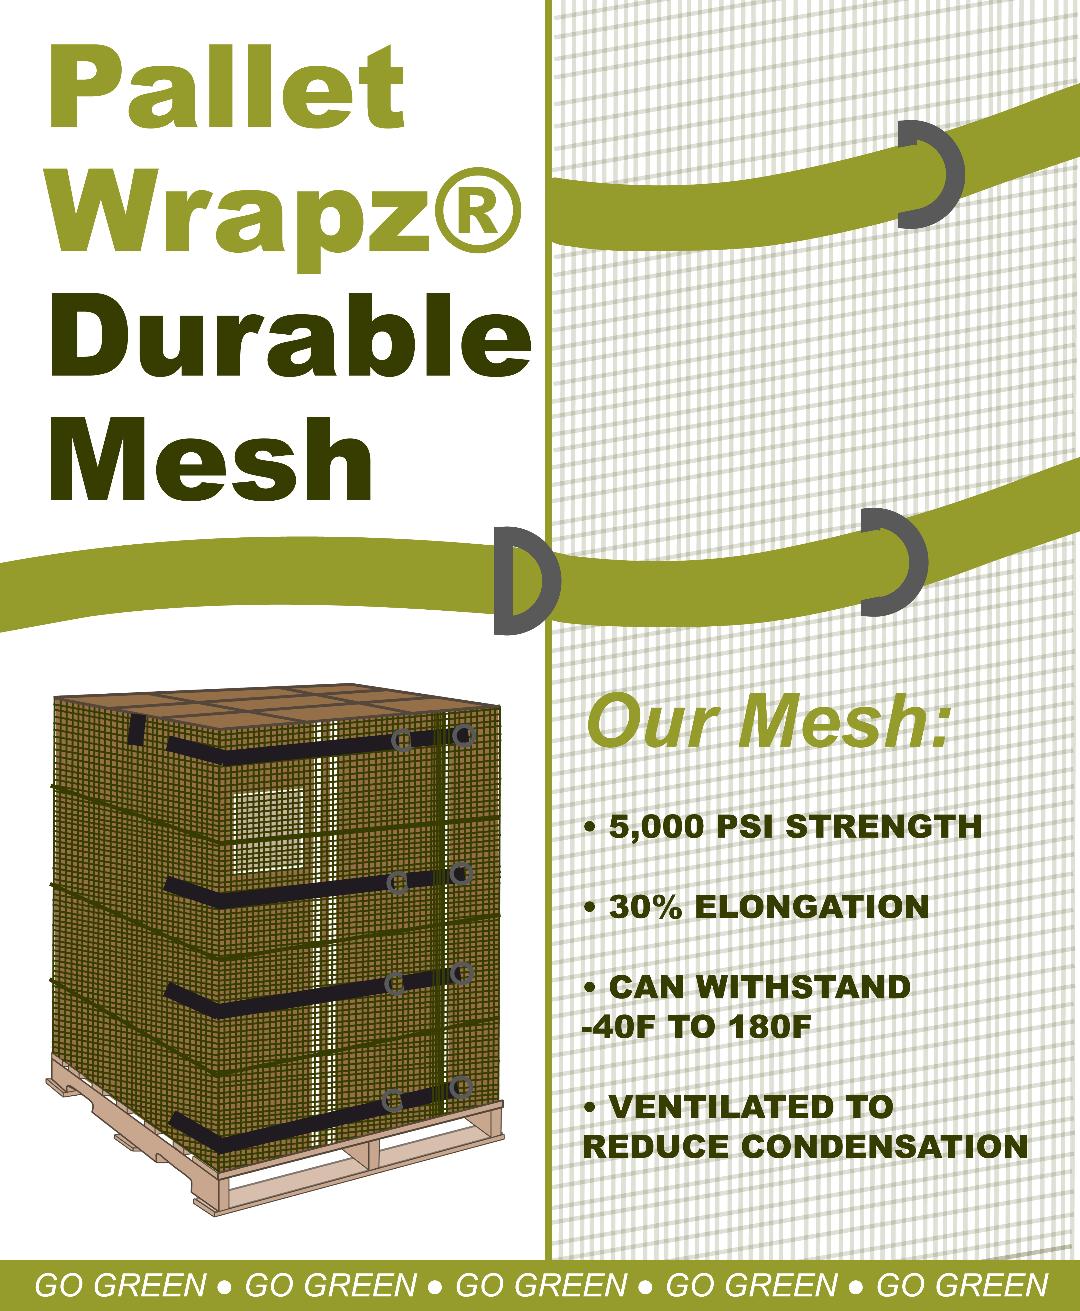 6 Foot Tall Industrial Eco Friendly Warehouse Pallet Cover Wrap That is  Reusable